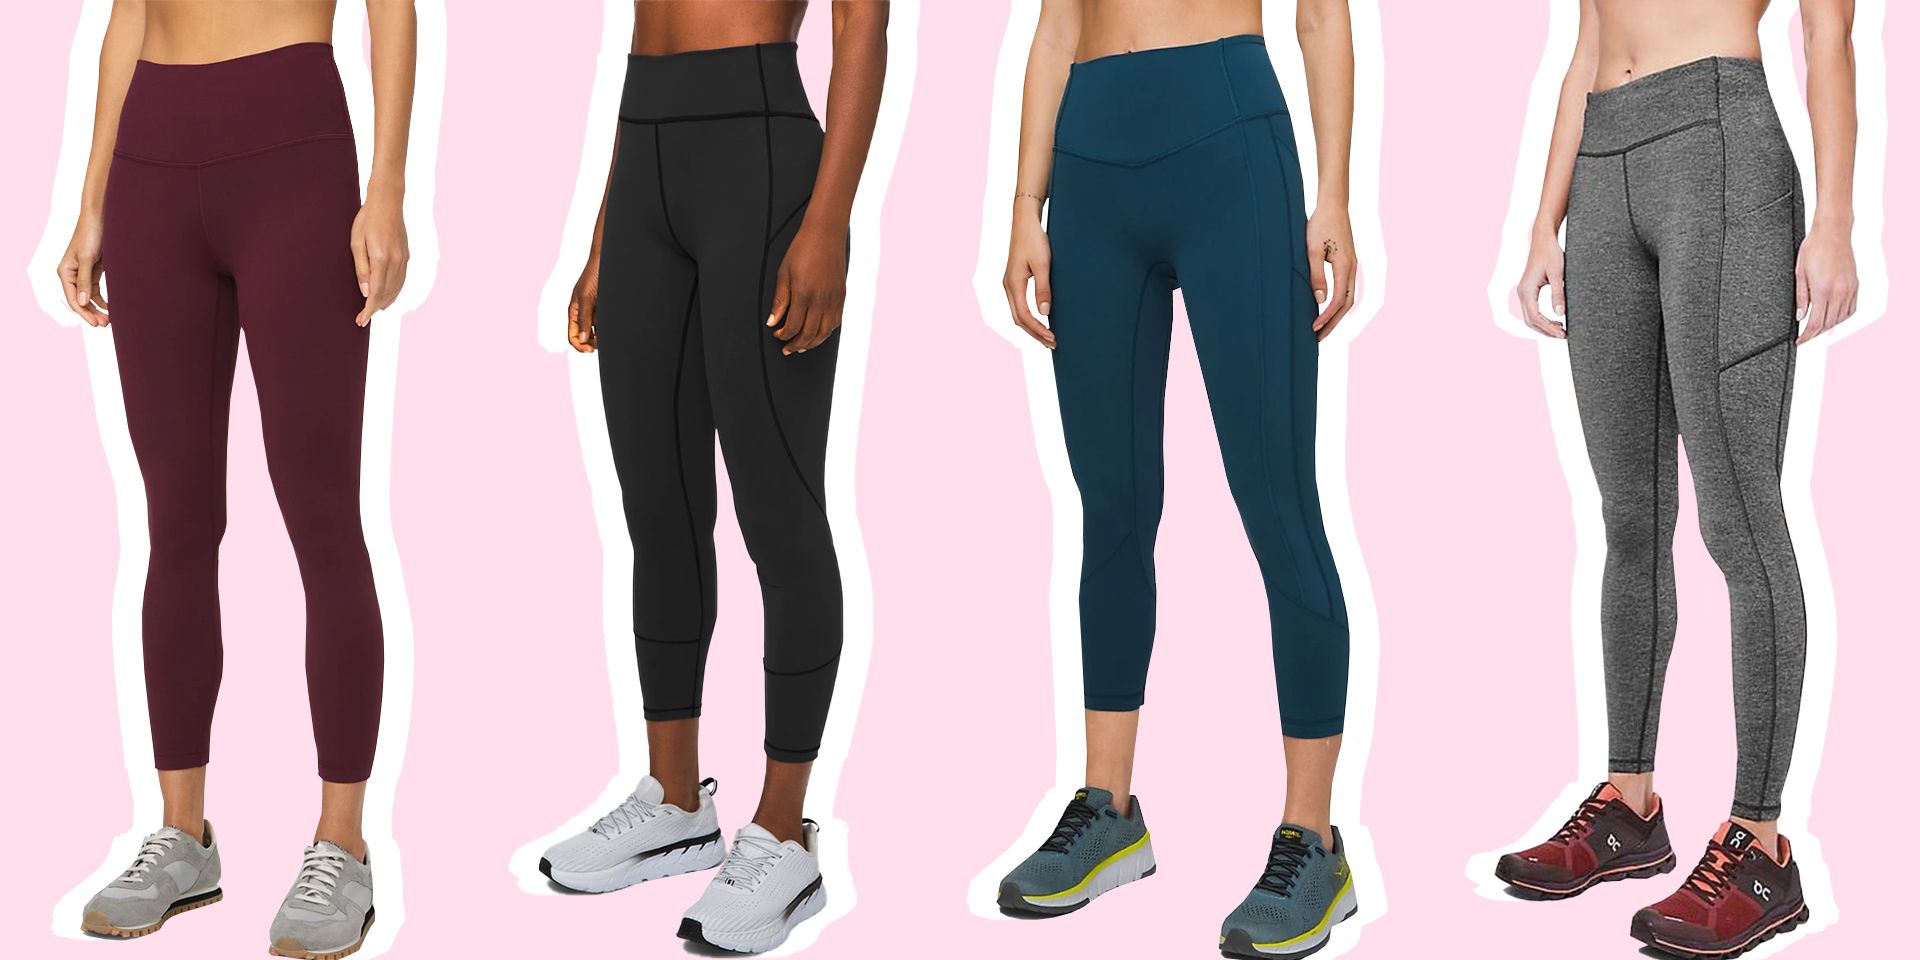 Lululemon Align Pant Review: One Year Later